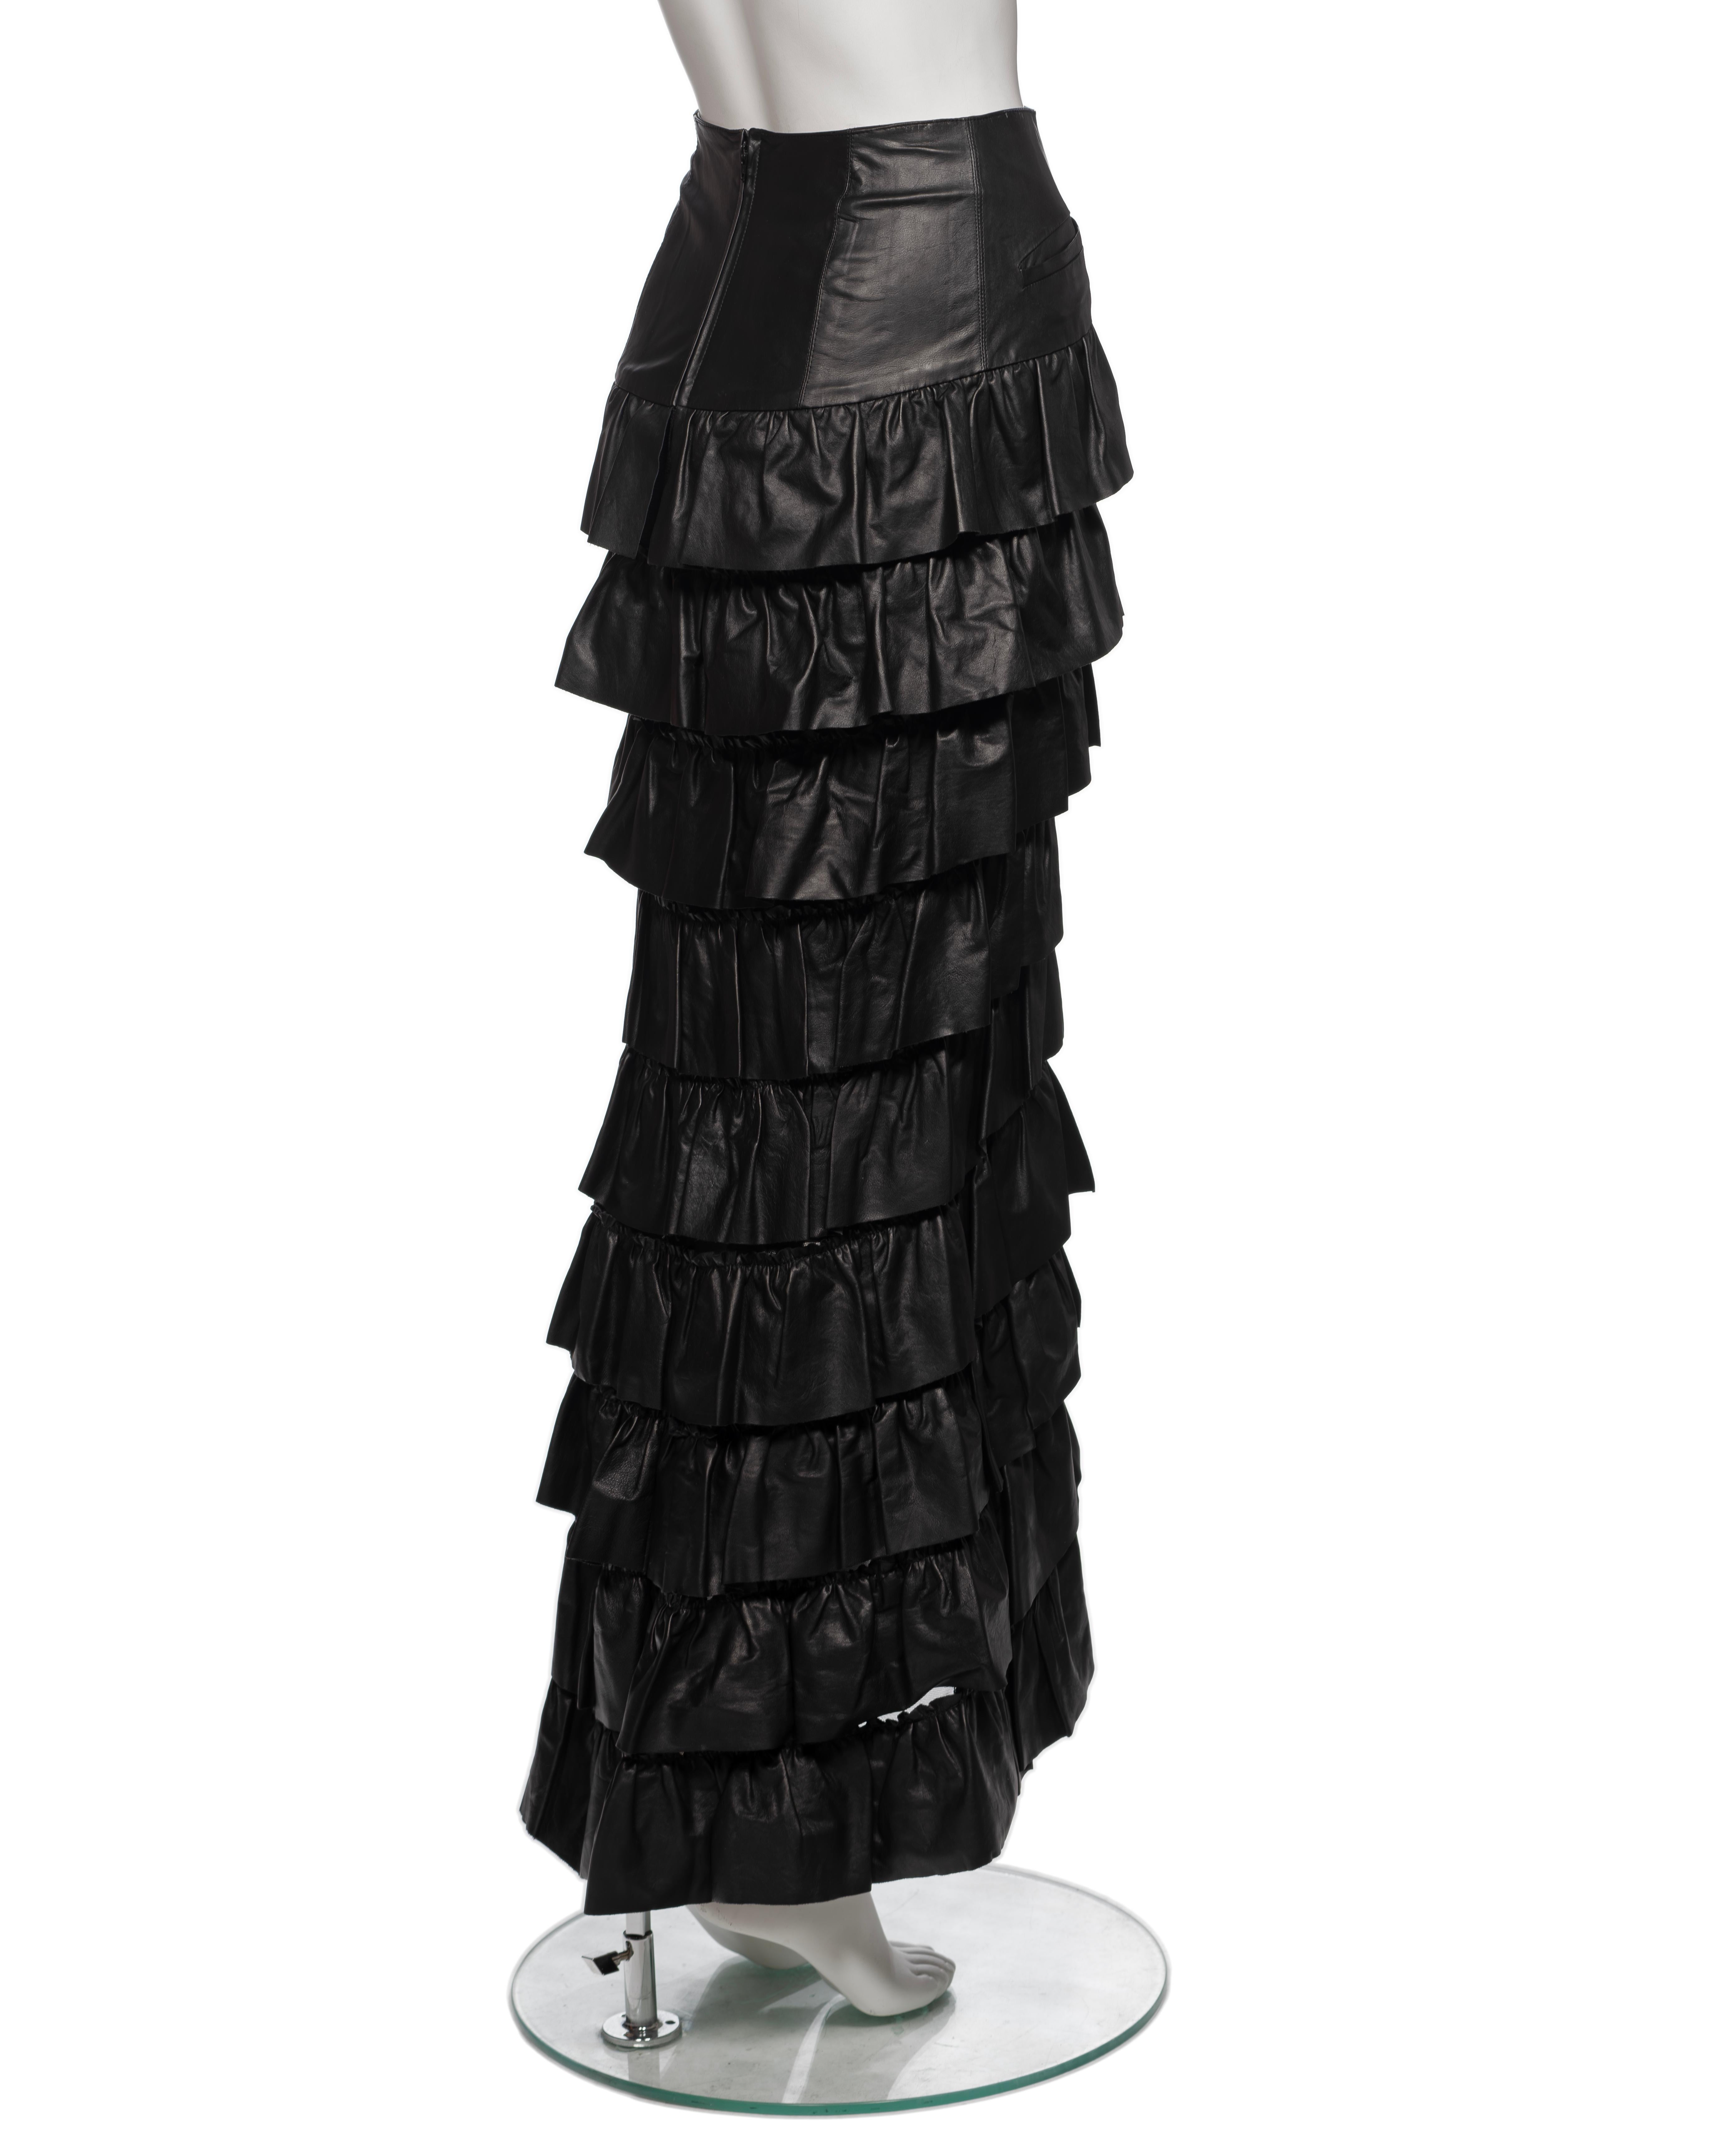 Chanel by Karl Lagerfeld Black Leather Tiered Ruffled Maxi Skirt, FW 2001 For Sale 4